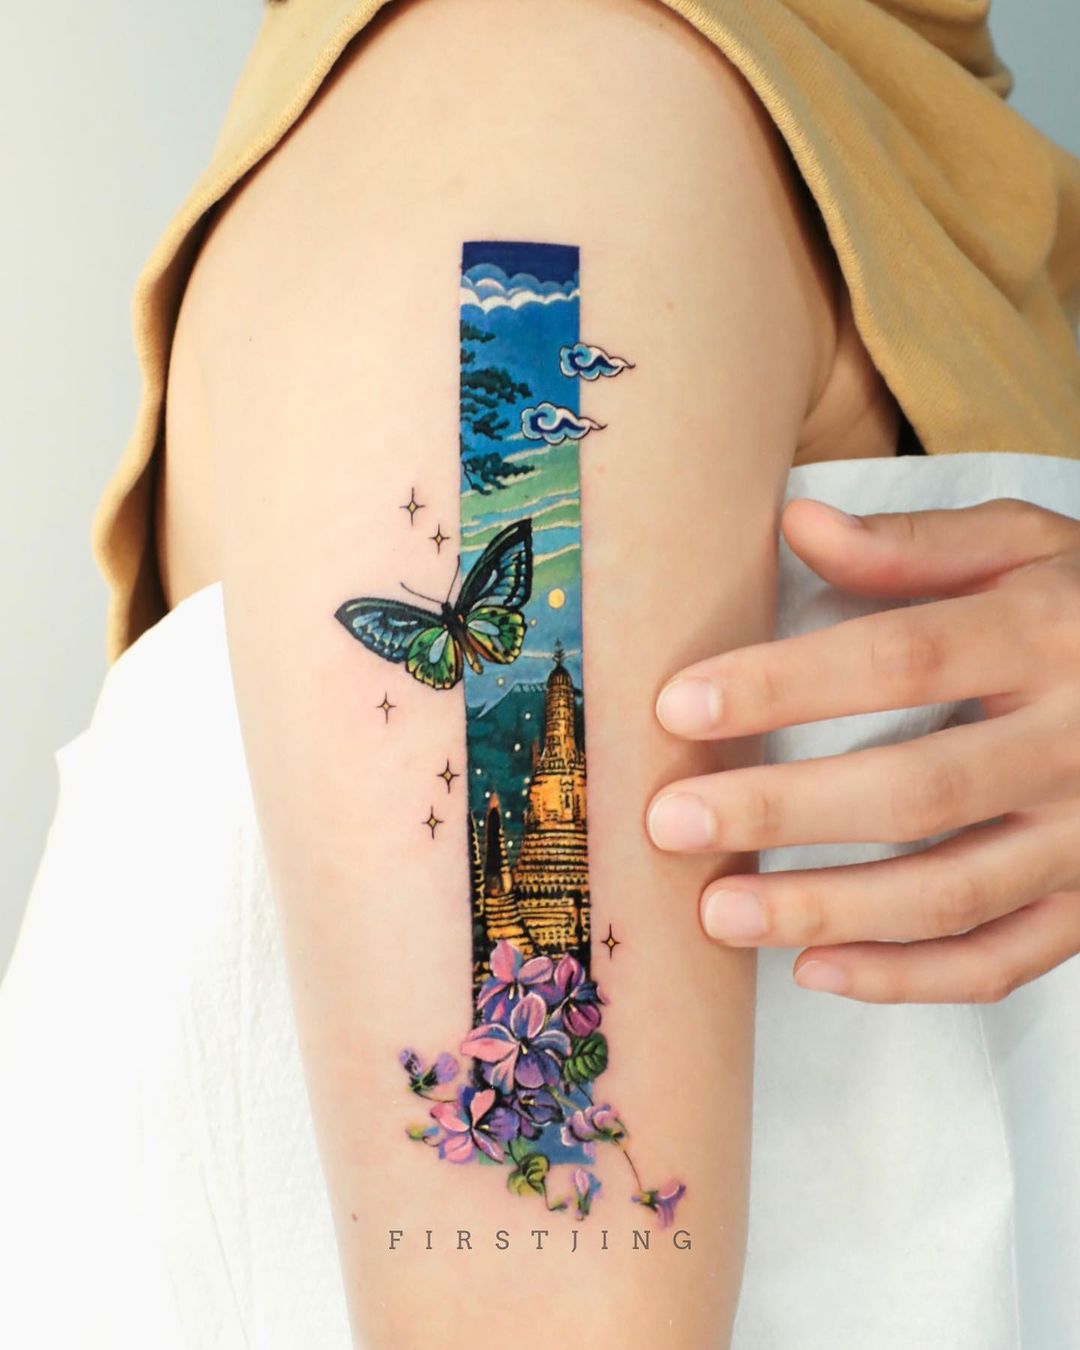 Amazingly intricate and colorful vertical tattoos by Jing